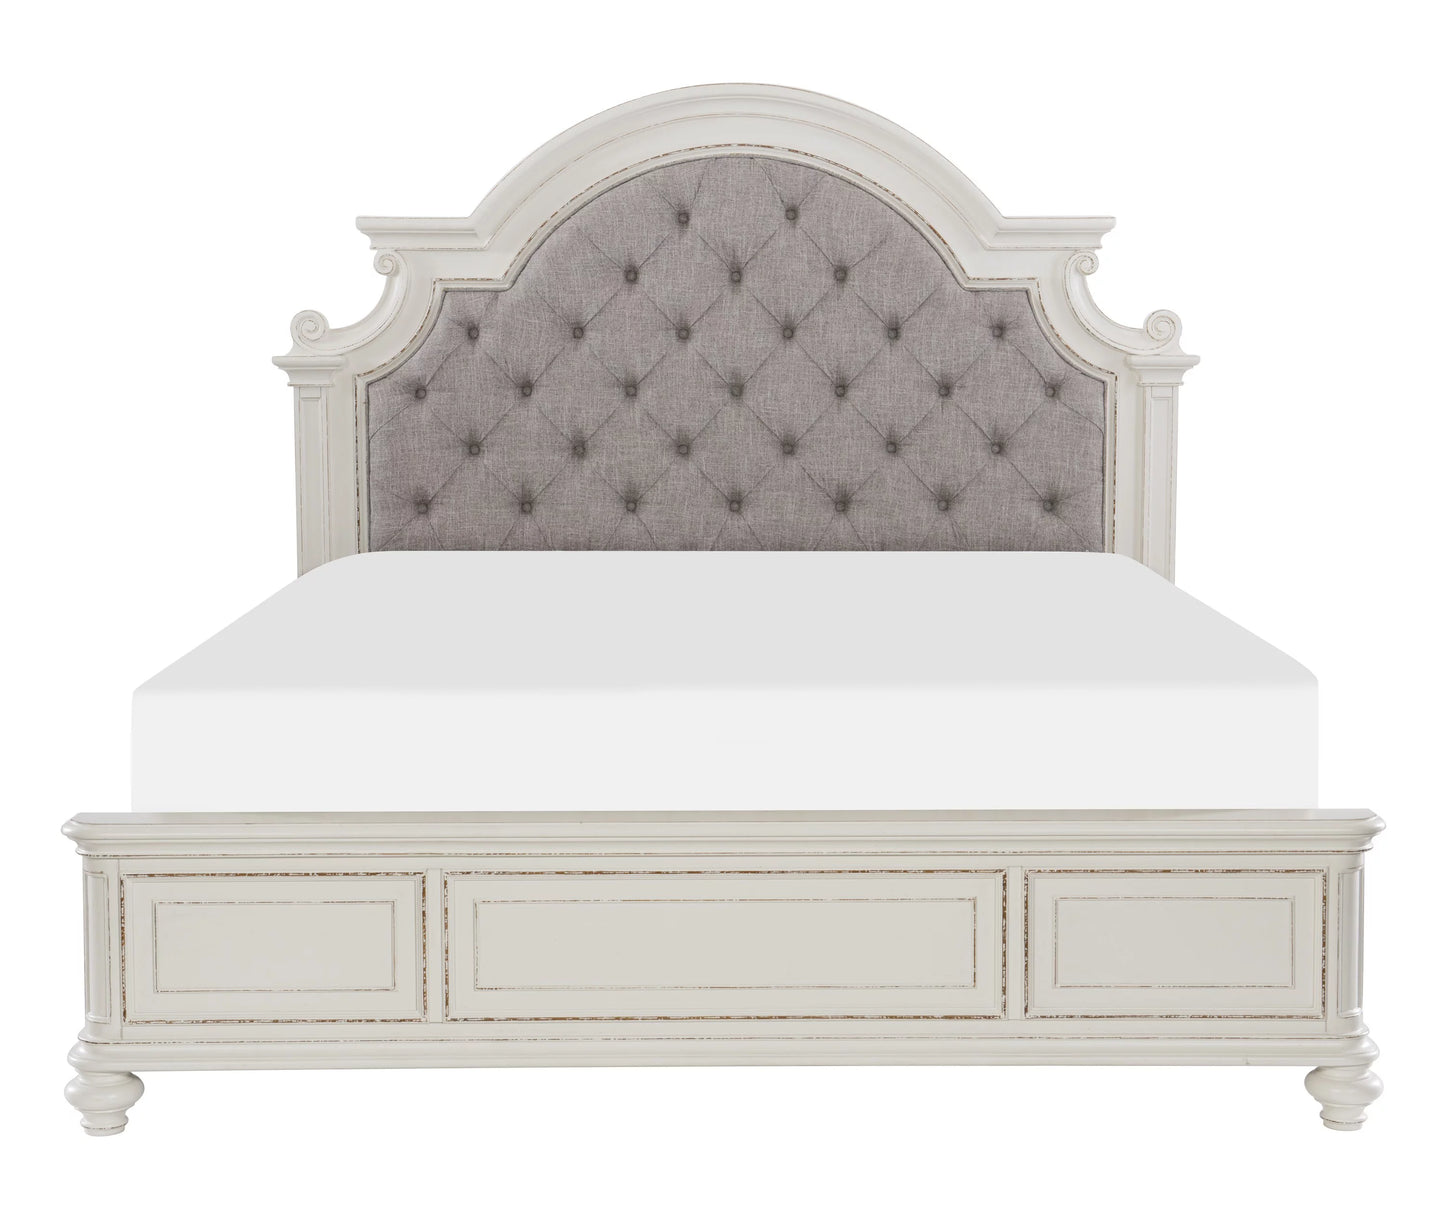 Beautiful White Finish Cal King Size Bed 1pc Button-Tufted Headboard Wooden Bedroom Furniture